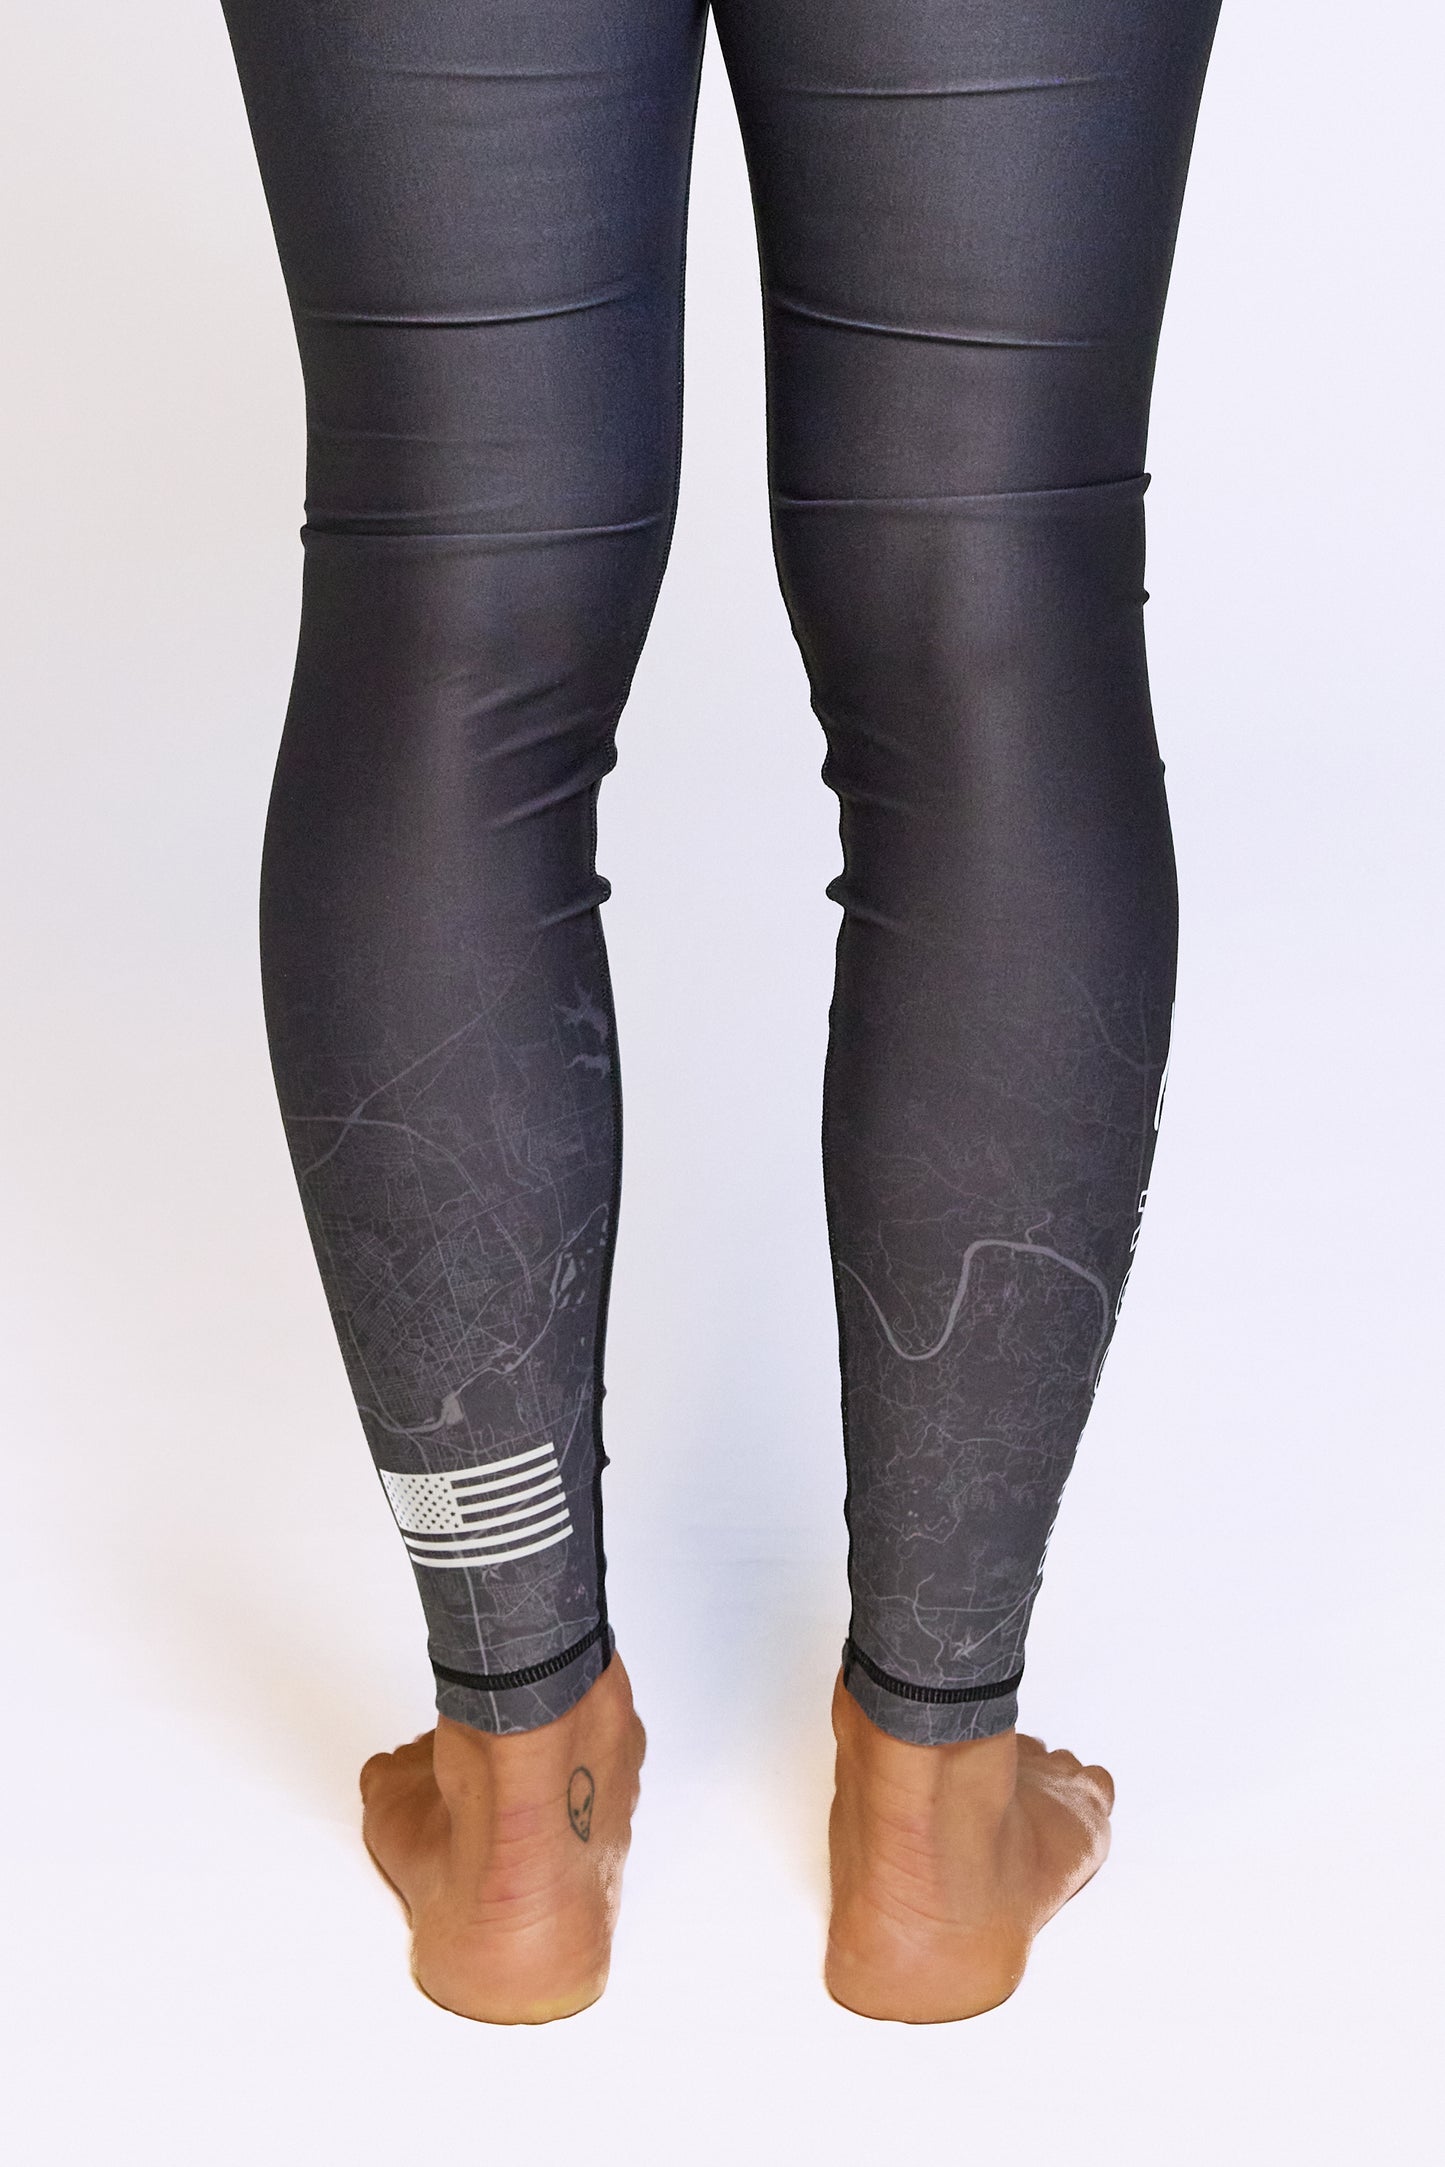 Trailblazer Women's High-Waisted Spats (Unranked)